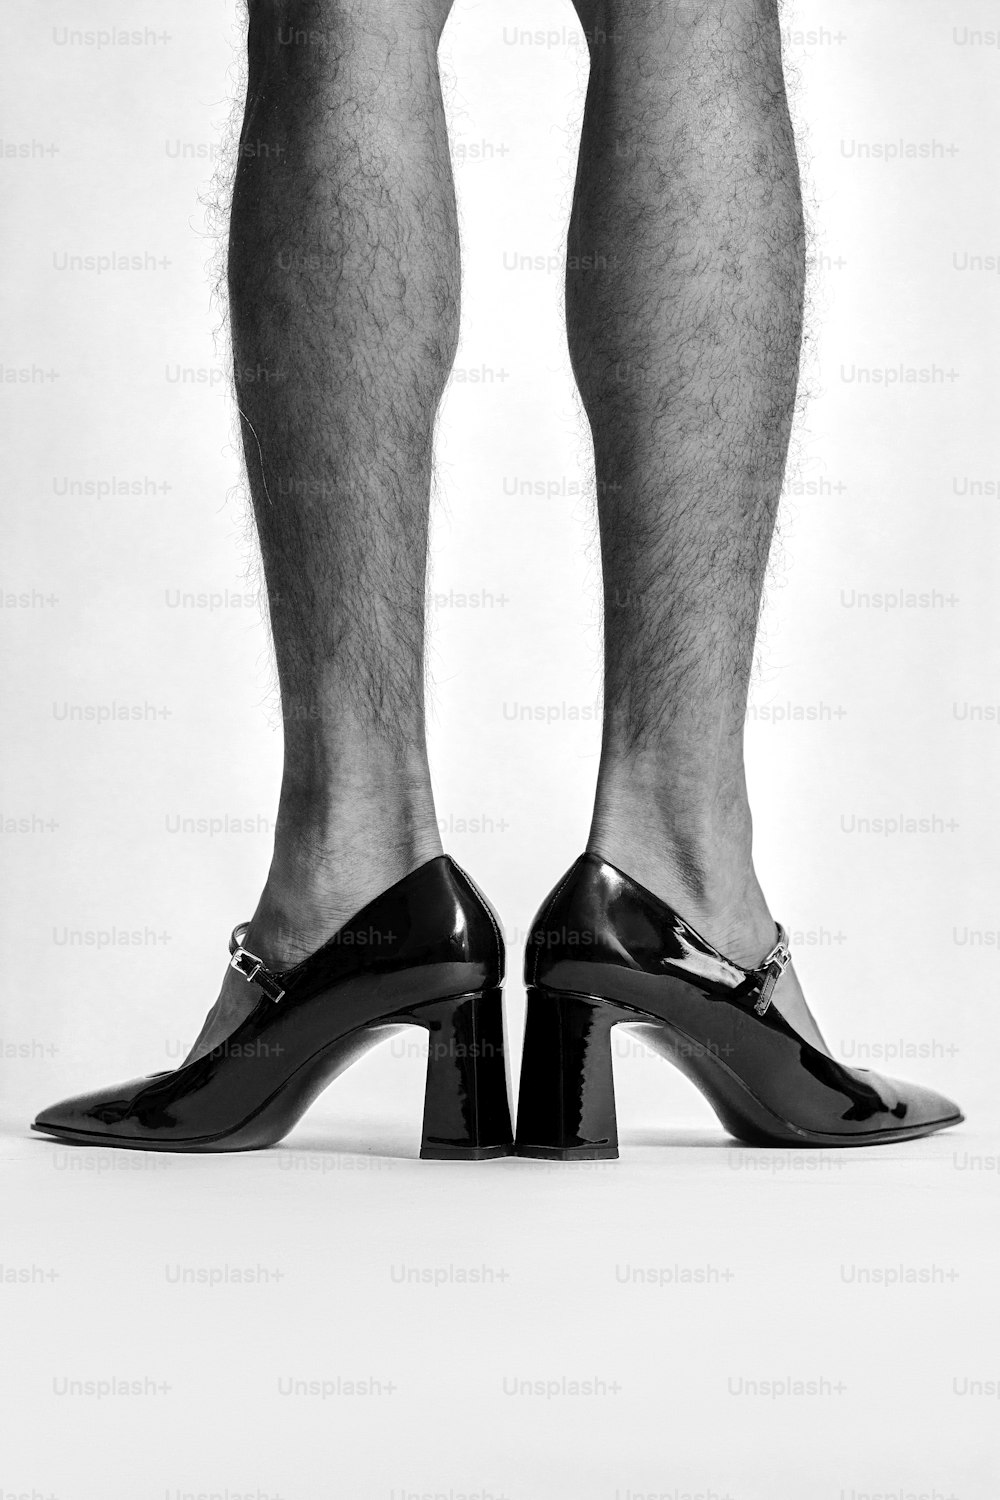 a black and white photo of a man's legs wearing high heels